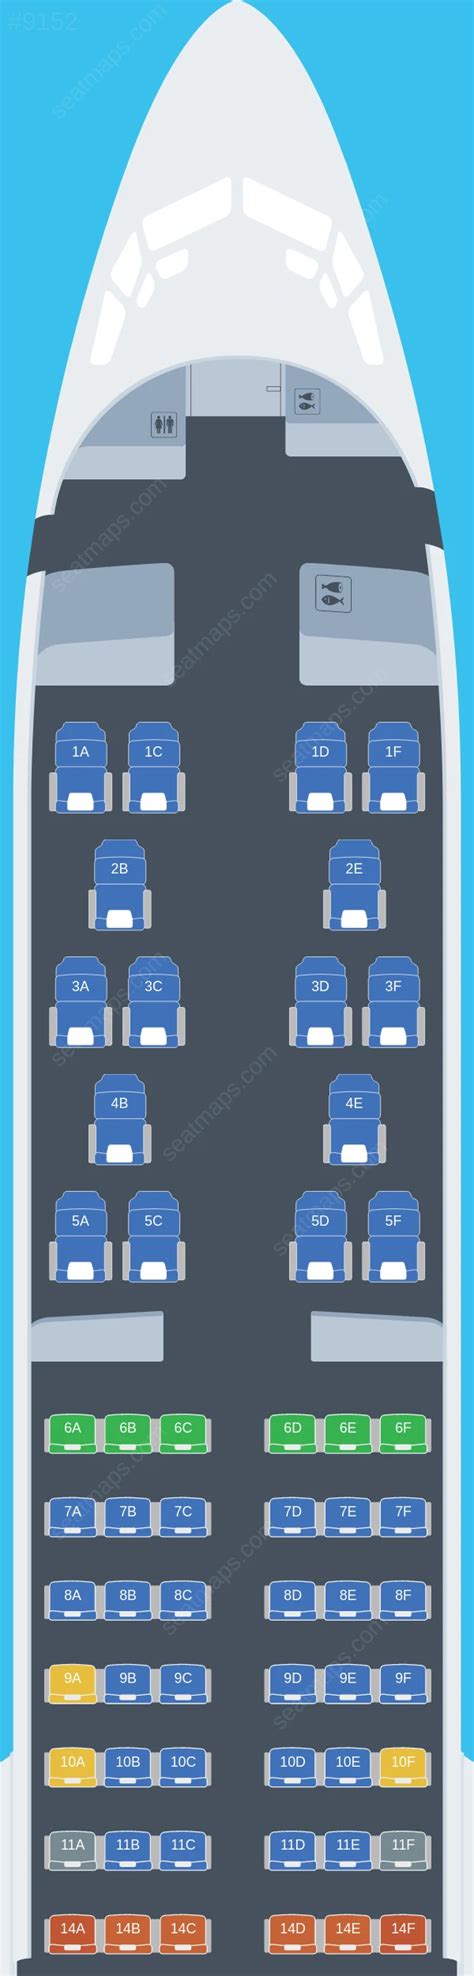 Seat Map Of Flydubai Boeing Max Aircraft